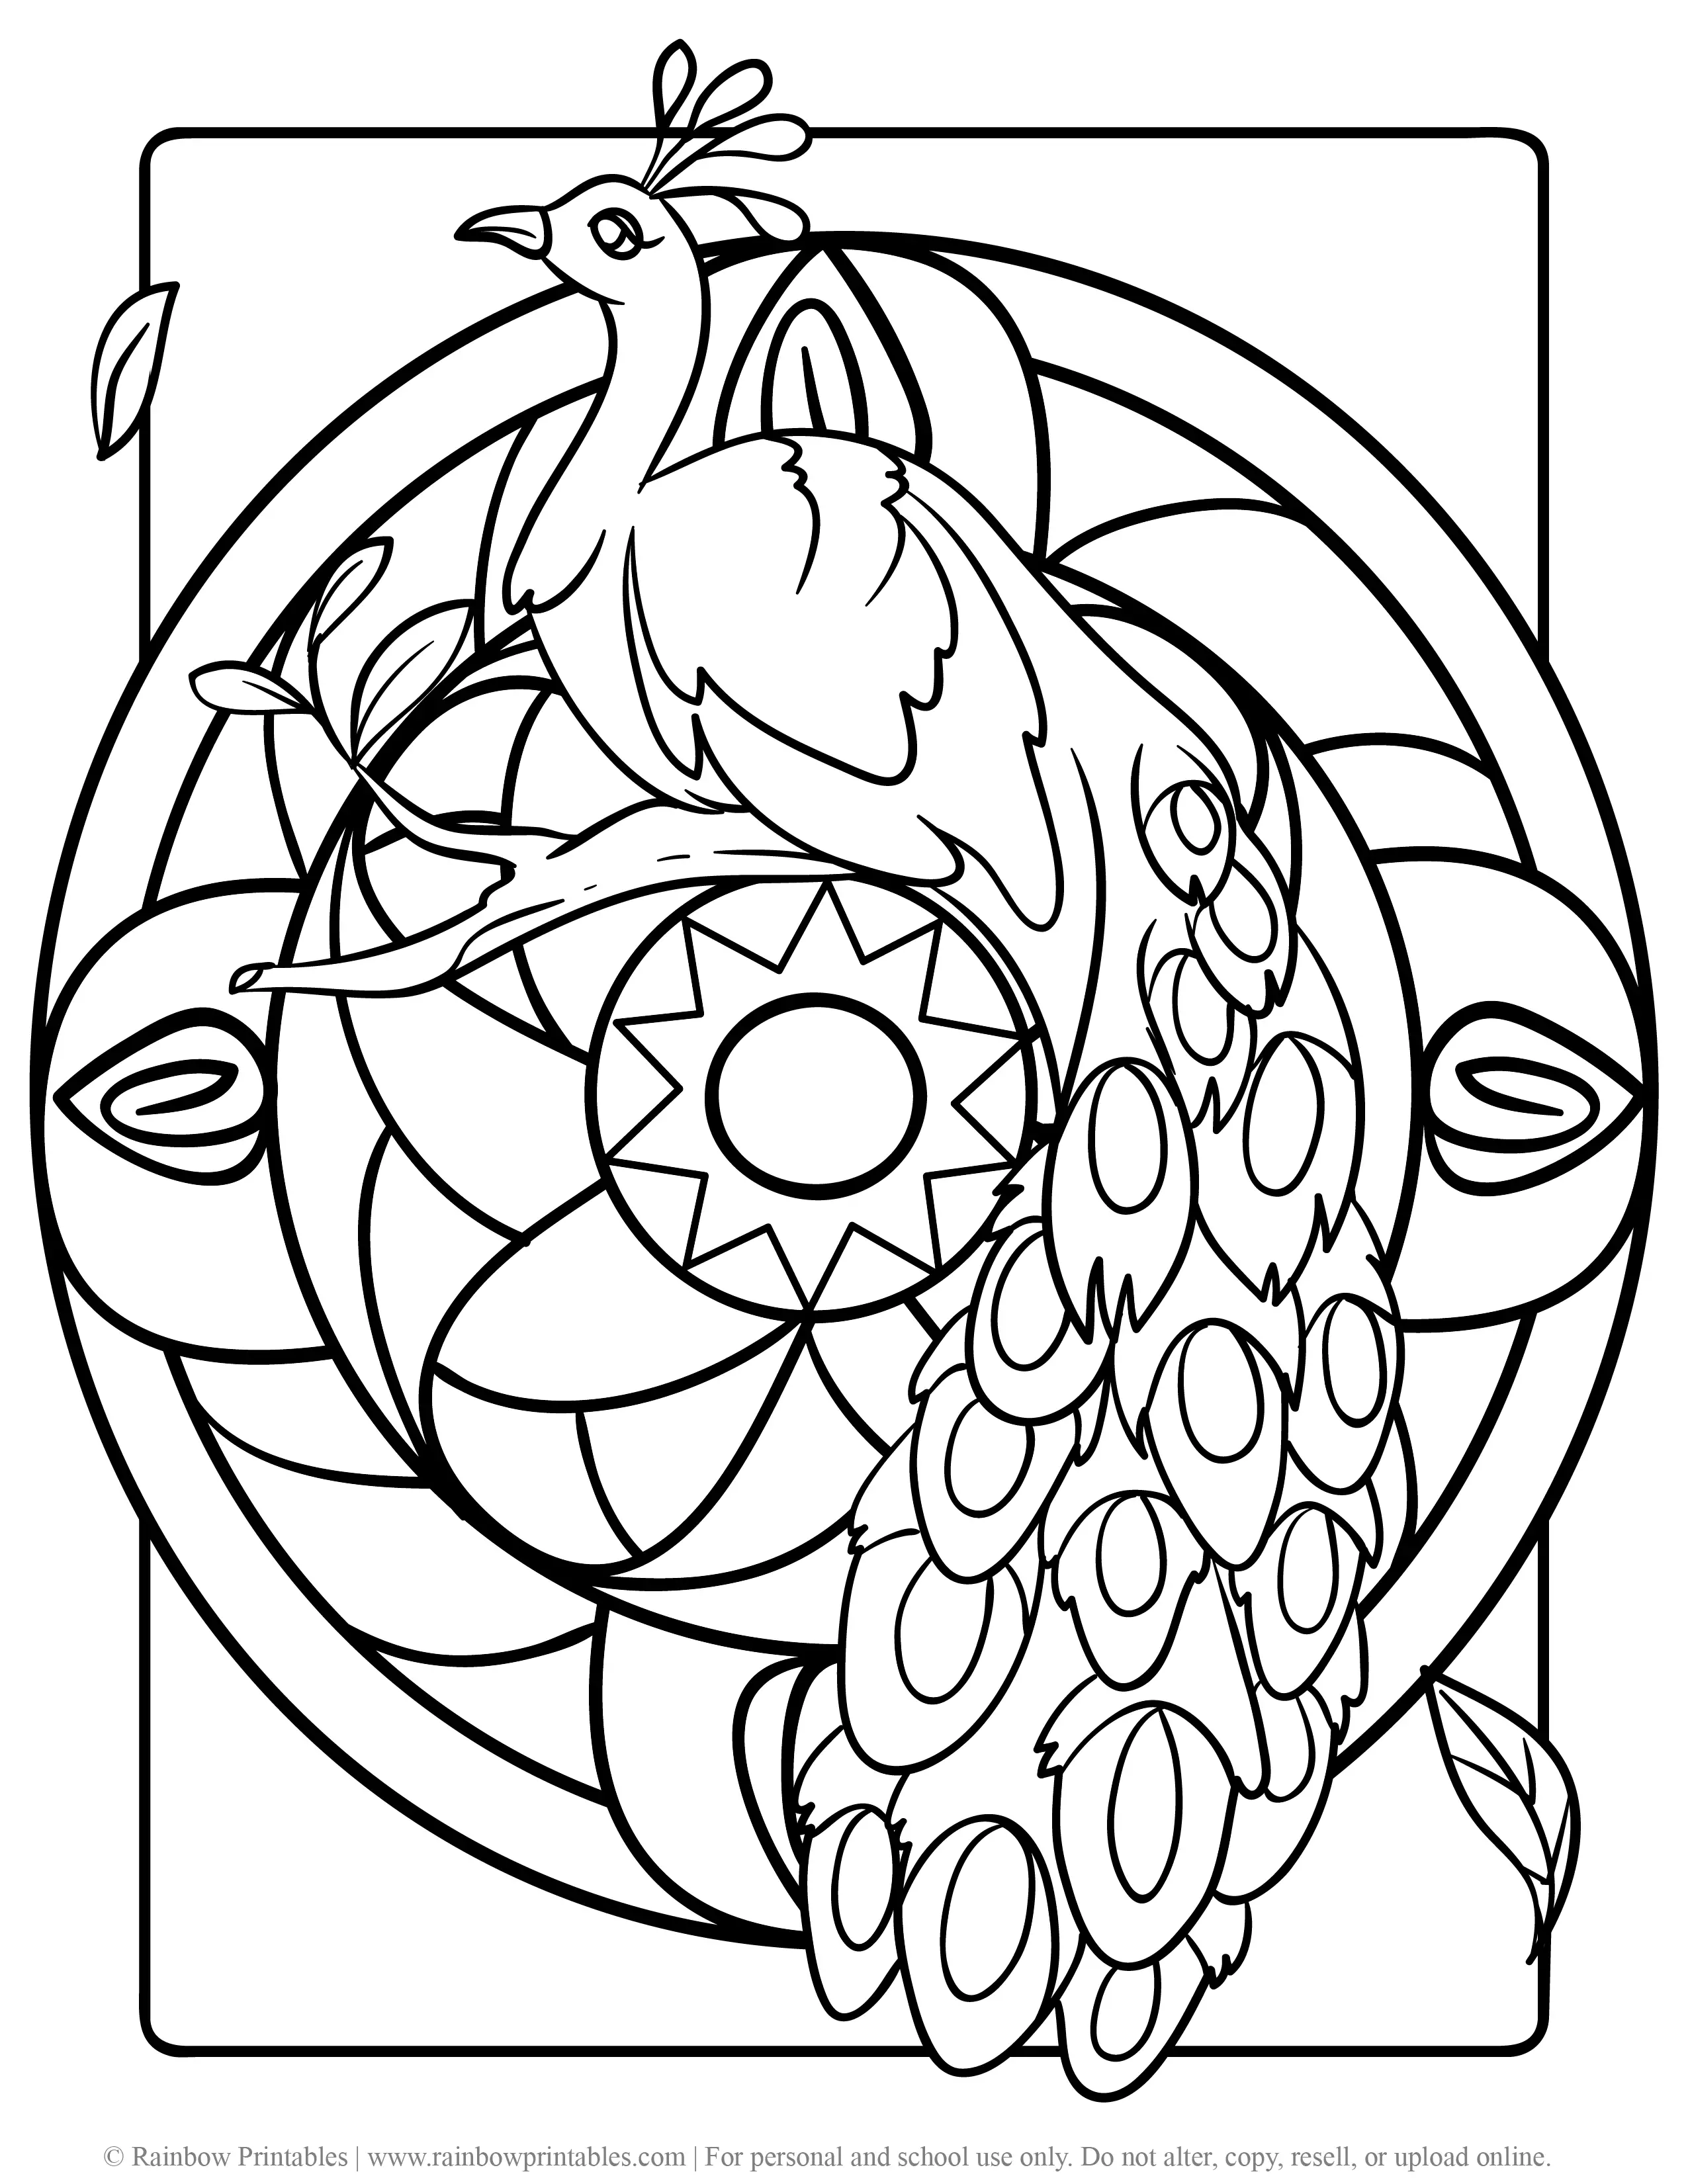 Free Coloring Pages for Kids Drawing Activities Line Art Illustration Graceful Beautiful Peacock Mandala